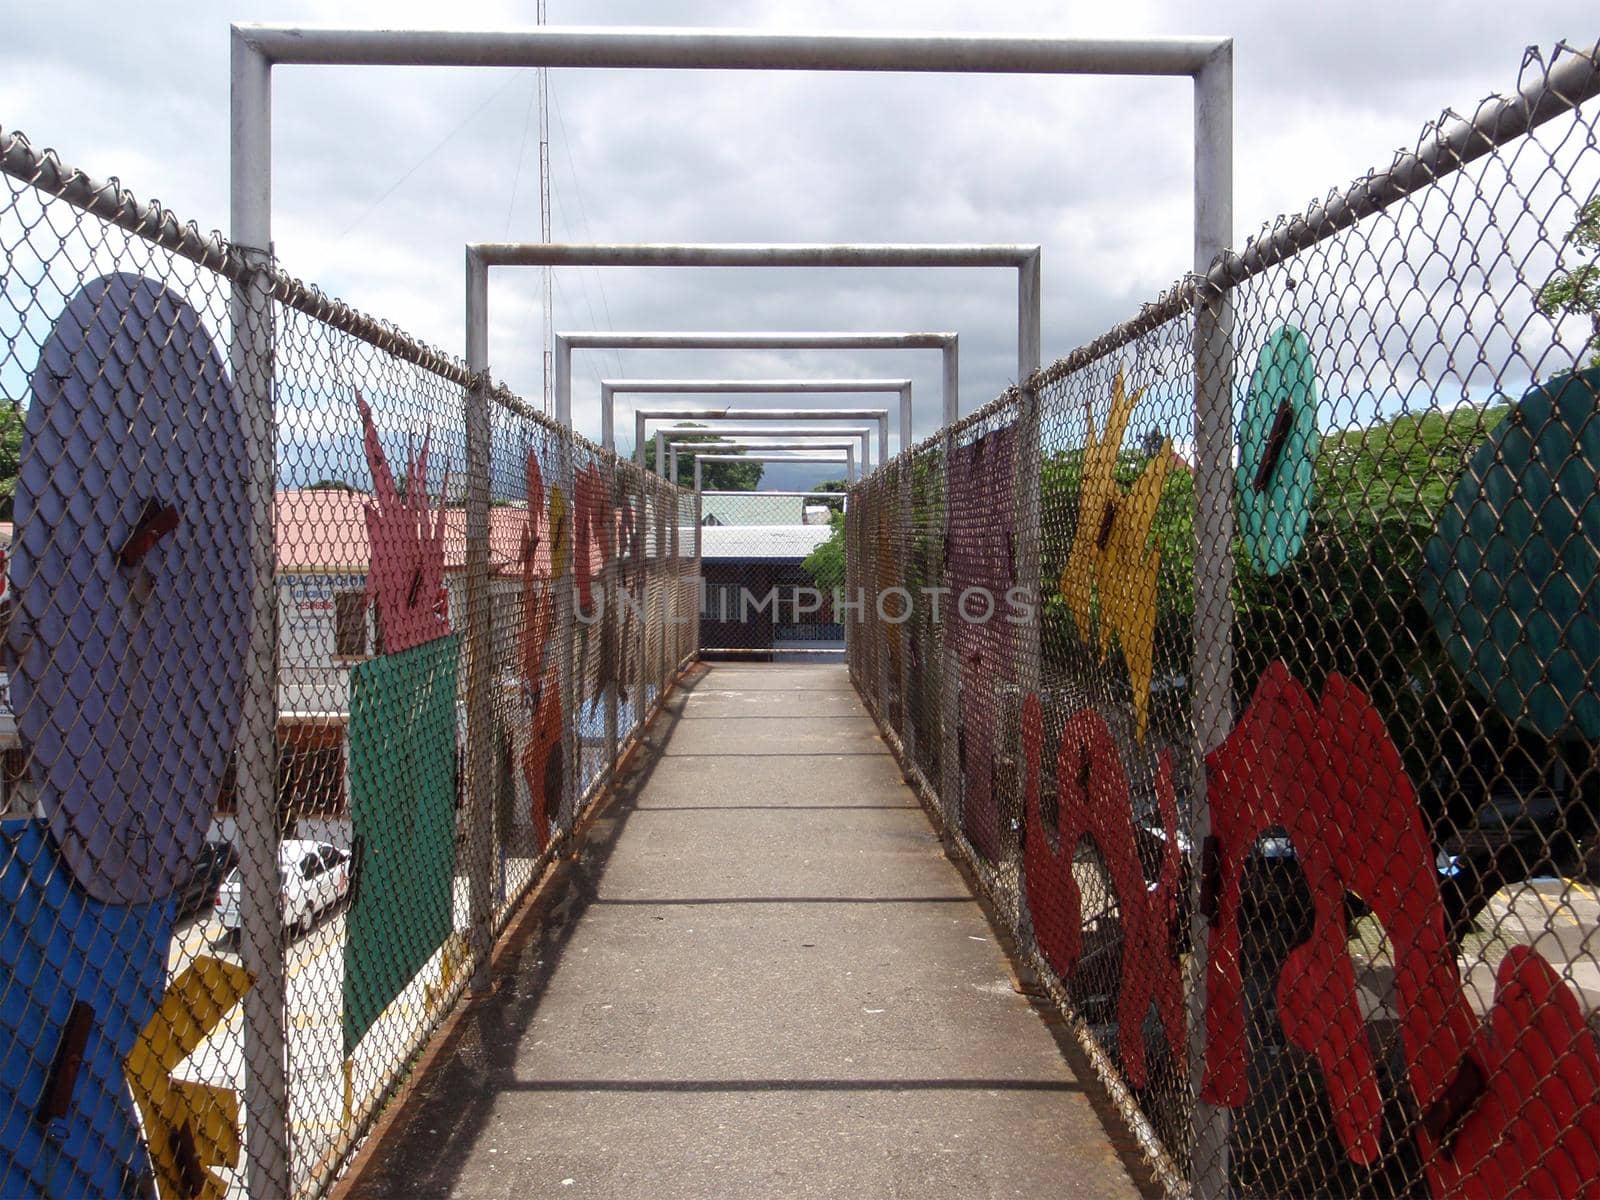 Artistic Road overpass fenced for pedestrian safety in San Jose, Costa Rica